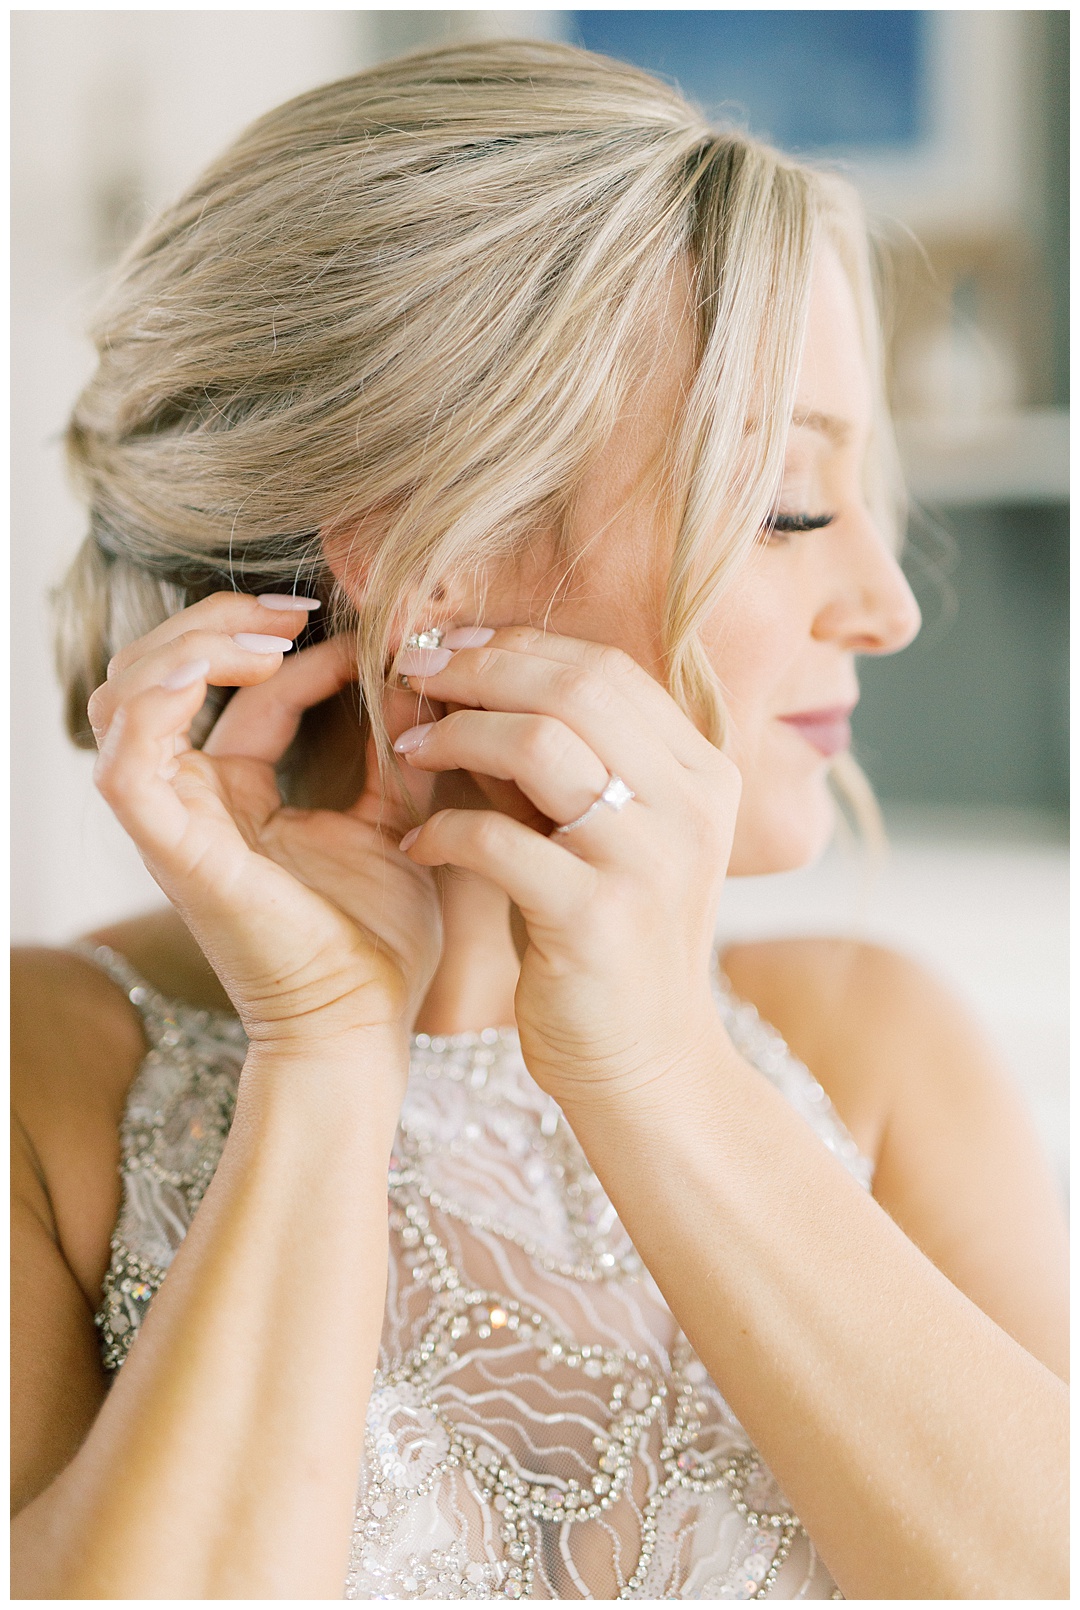 Hailey Paige Dress with Wedding Earrings Lush Backyard Wedding on Film Featured on Magnolia Rouge with Sarah Sunstrom Photography